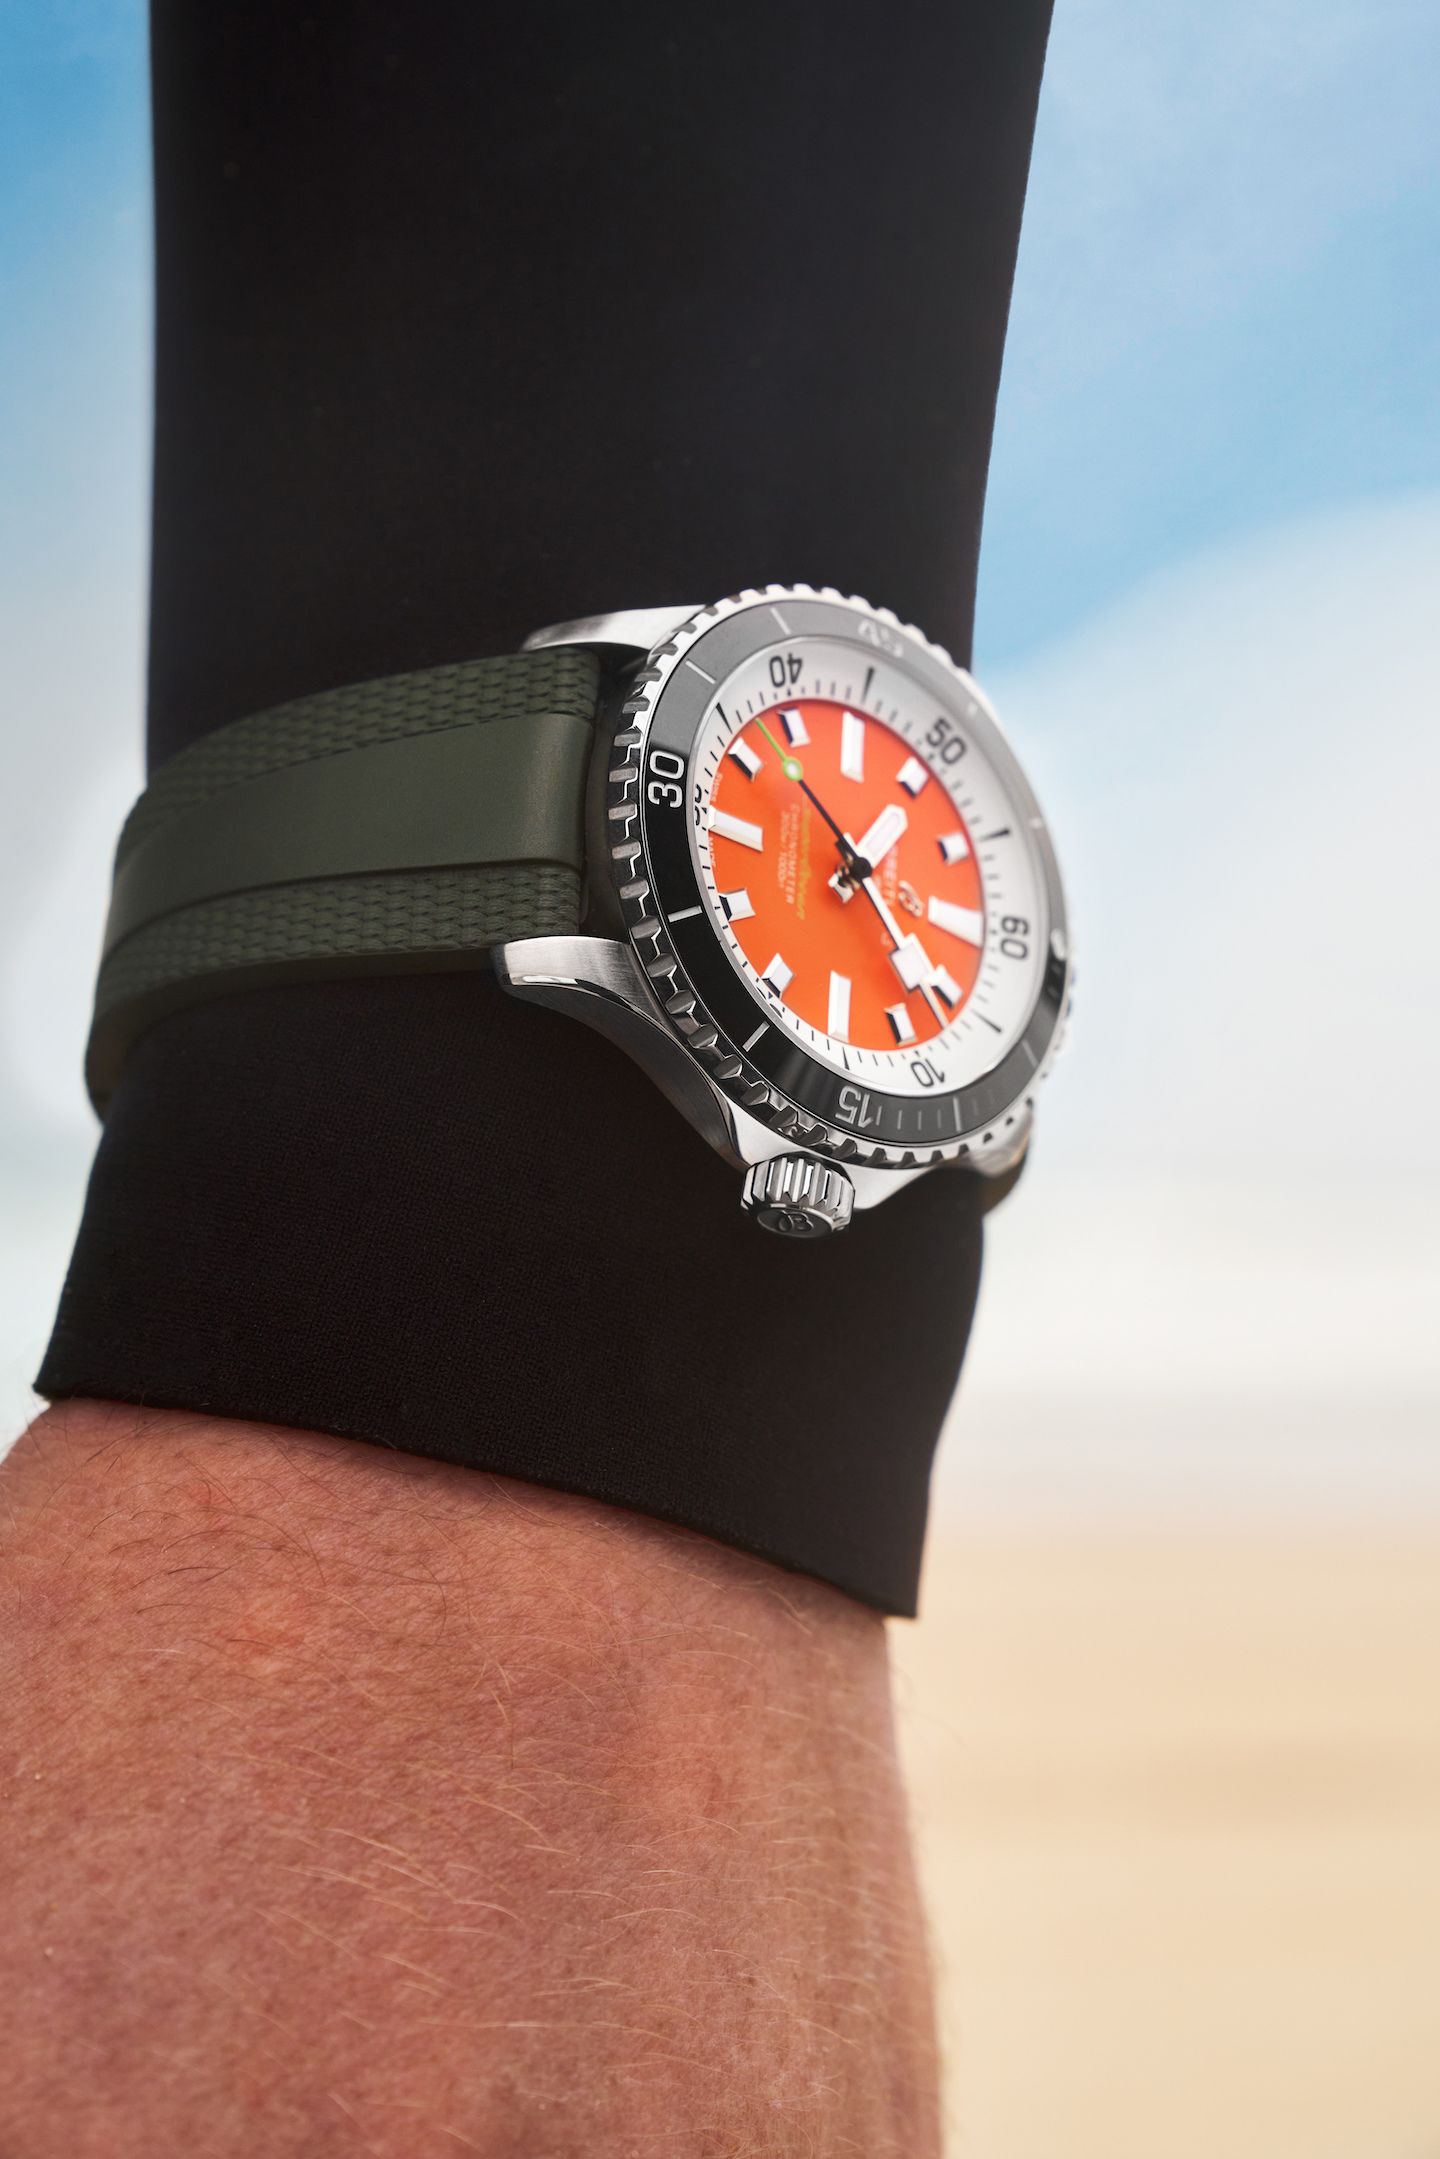 Breitling Superocean 42 Kelly Slater Limited Edition_orange dial and green rubber strap_Ref. A173751A1O1S1_RGB